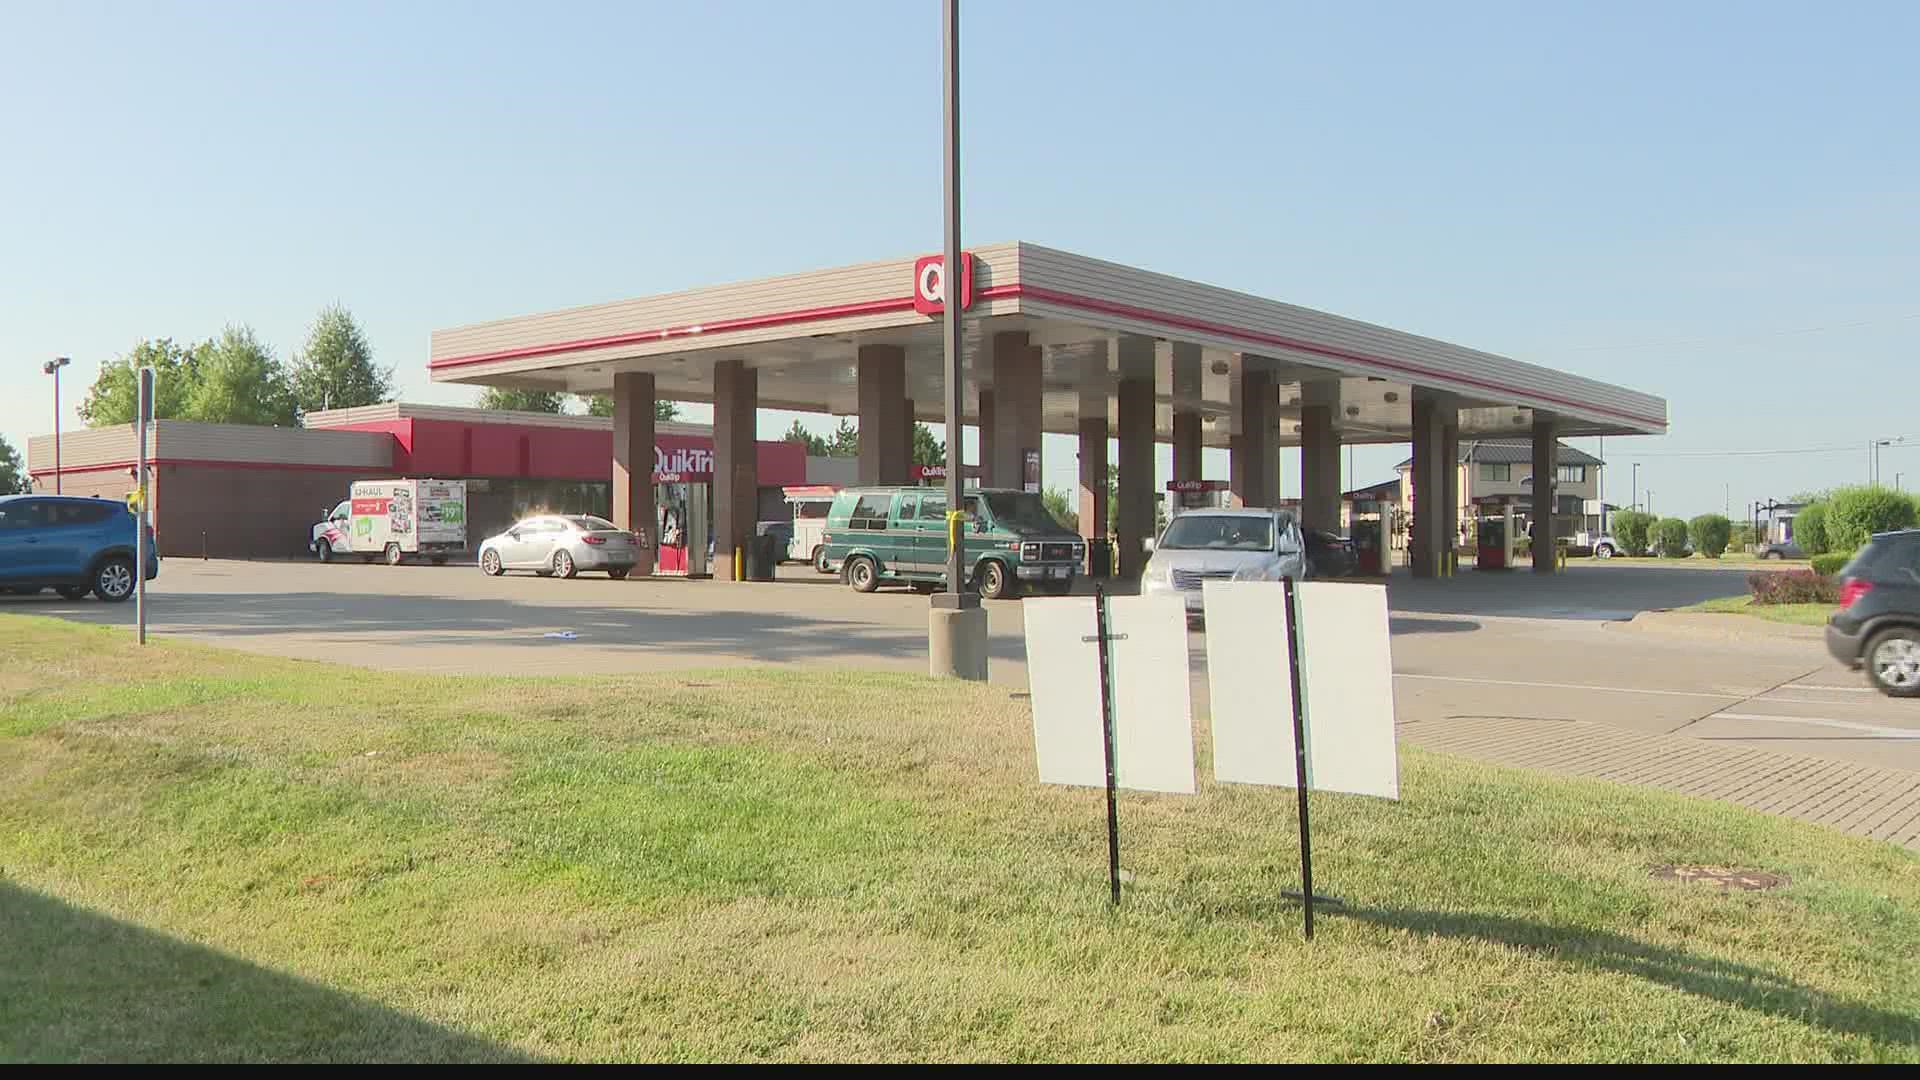 Customer who fatally shot robbery suspect talks about the St. Charles QuikTrip shooting. The incident happened on Saturday morning.